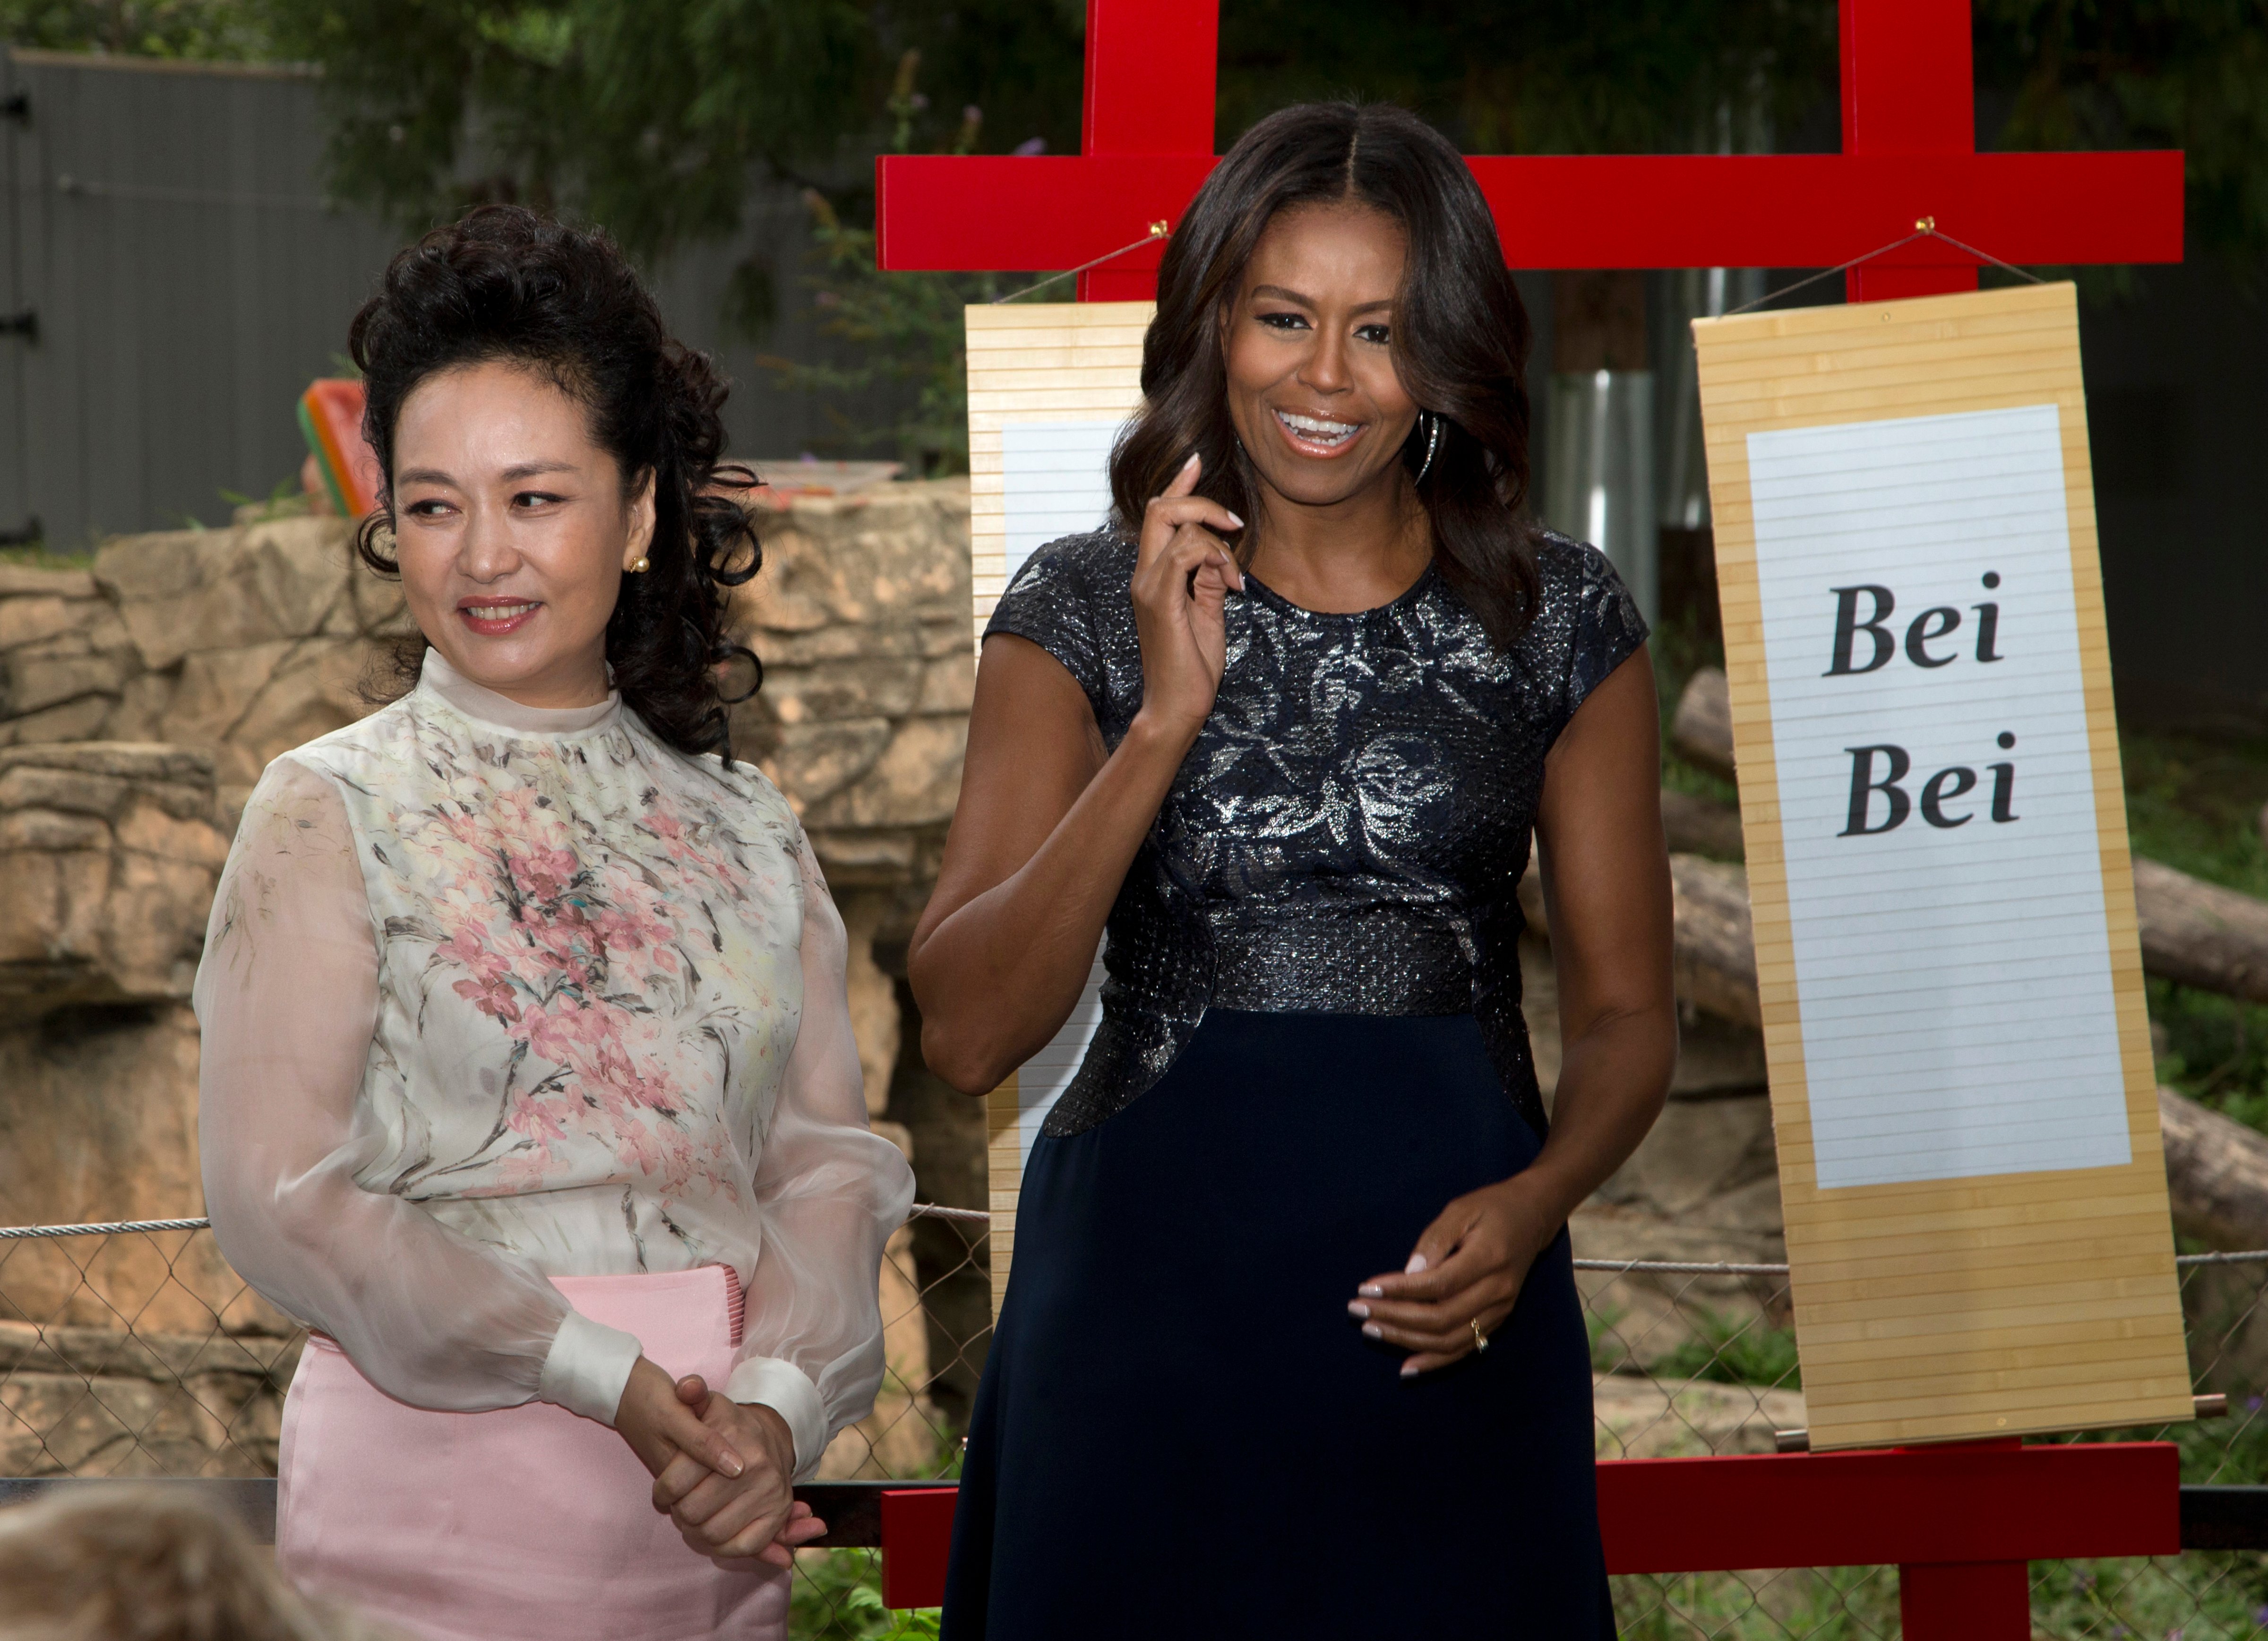 First lady Michelle Obama and China's first lady Peng Liyuan unfurled scrolls to announce panda Bei Bei's name on Sept. 22, 2015 (Manuel Balce Ceneta—AP)